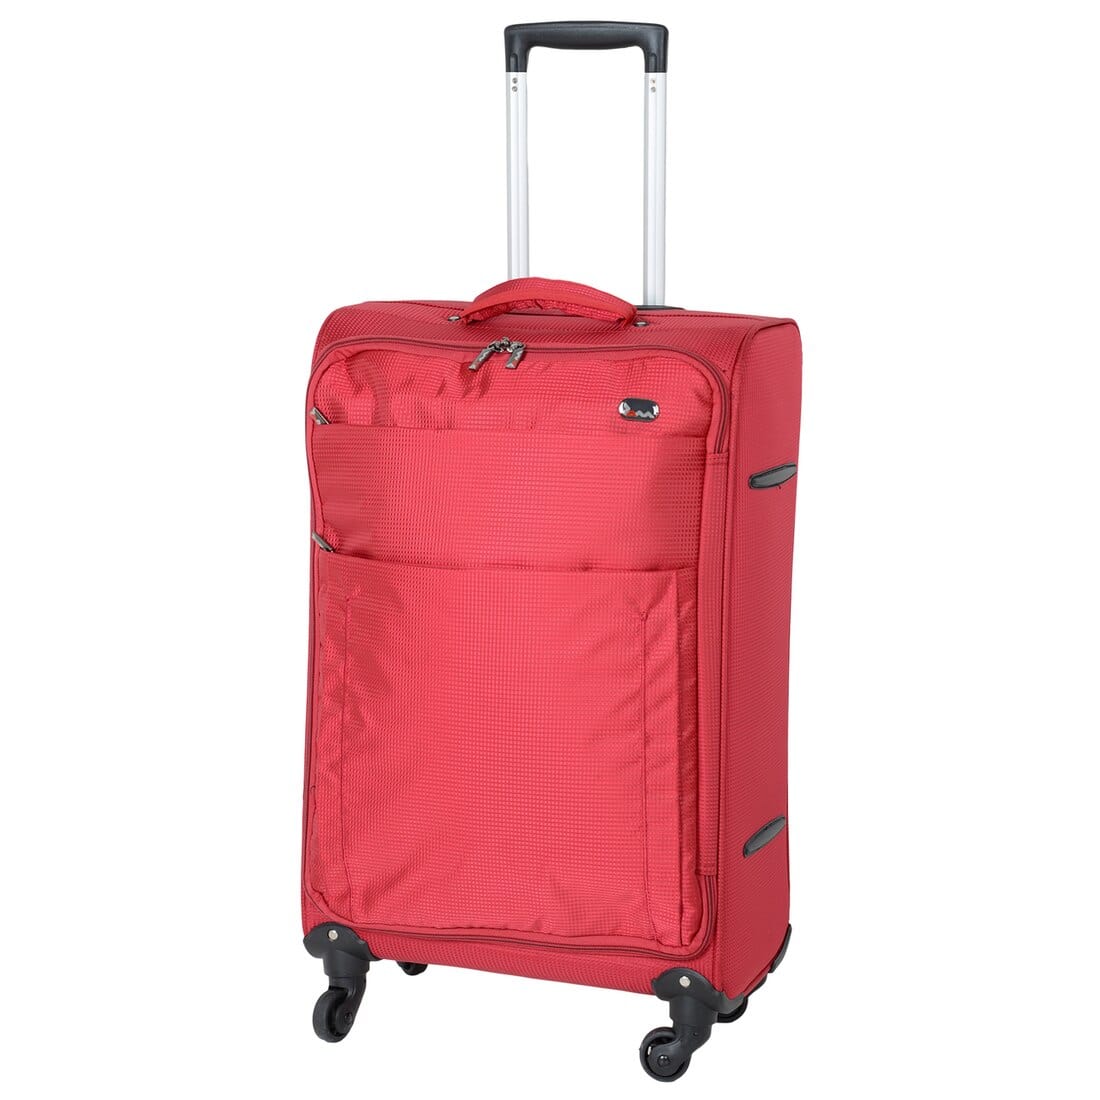 Voyager Ultra Lightweight Suitcase Trolley Case Luggage 4 Wheel Spinne ...